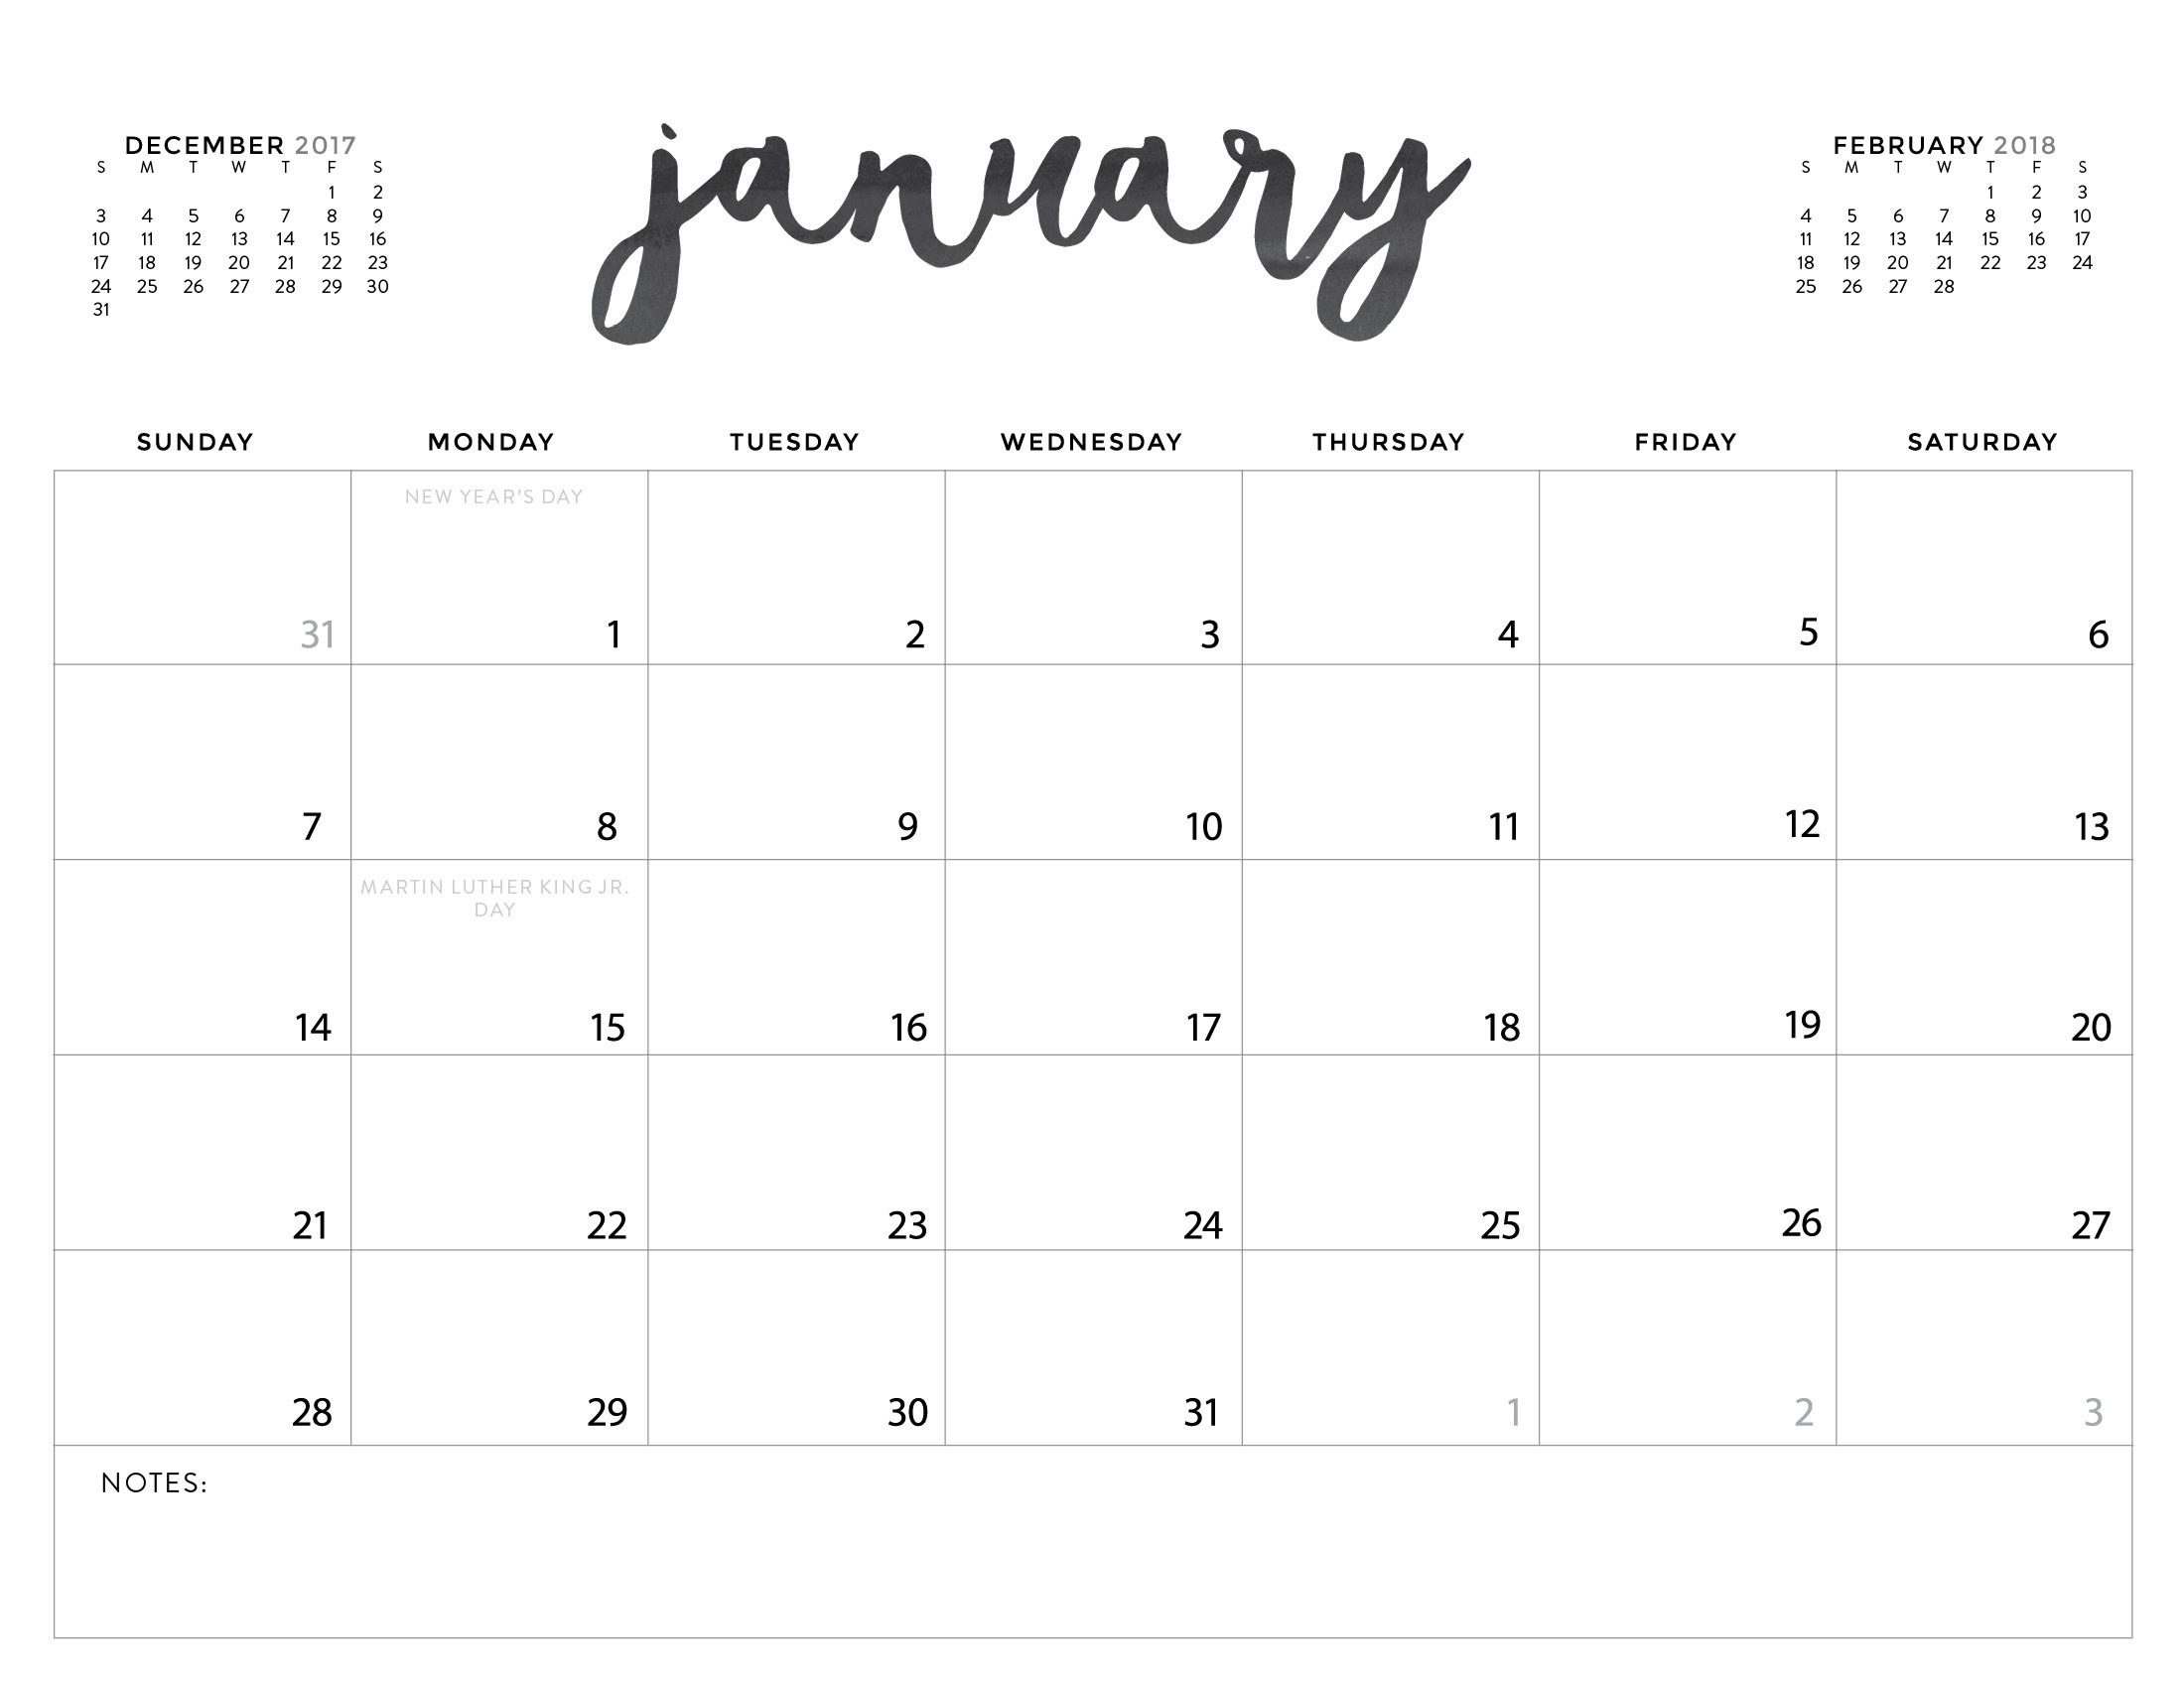 download your free 2018 printable calendars today there